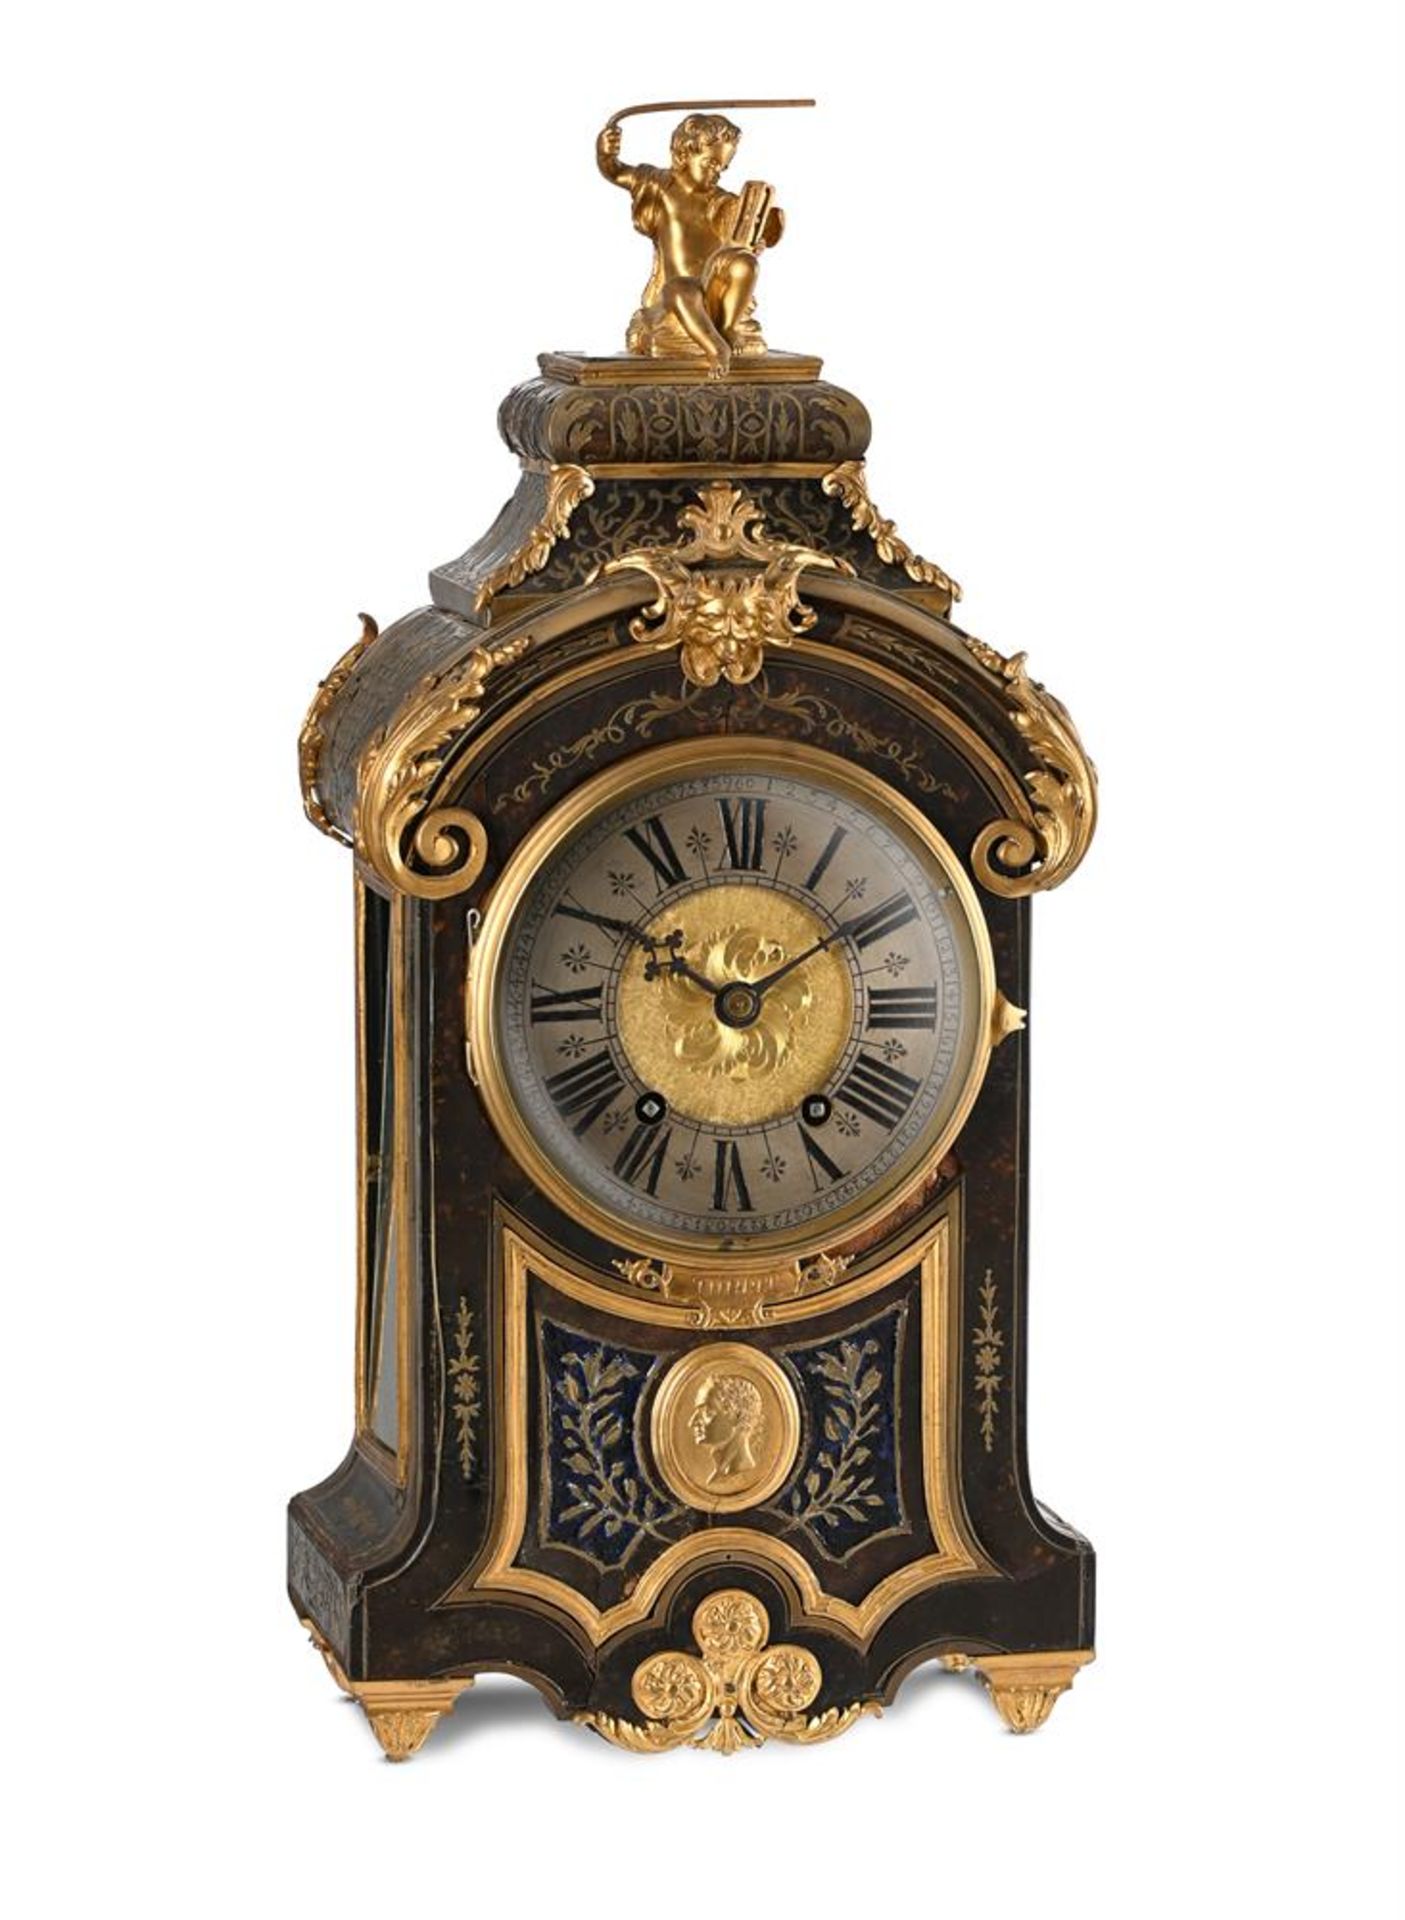 A FRENCH REGENCE BOULLE SMALL BRACKET CLOCK WITH LATER MOVEMENT, EARLY 18TH CENTURY AND LATER